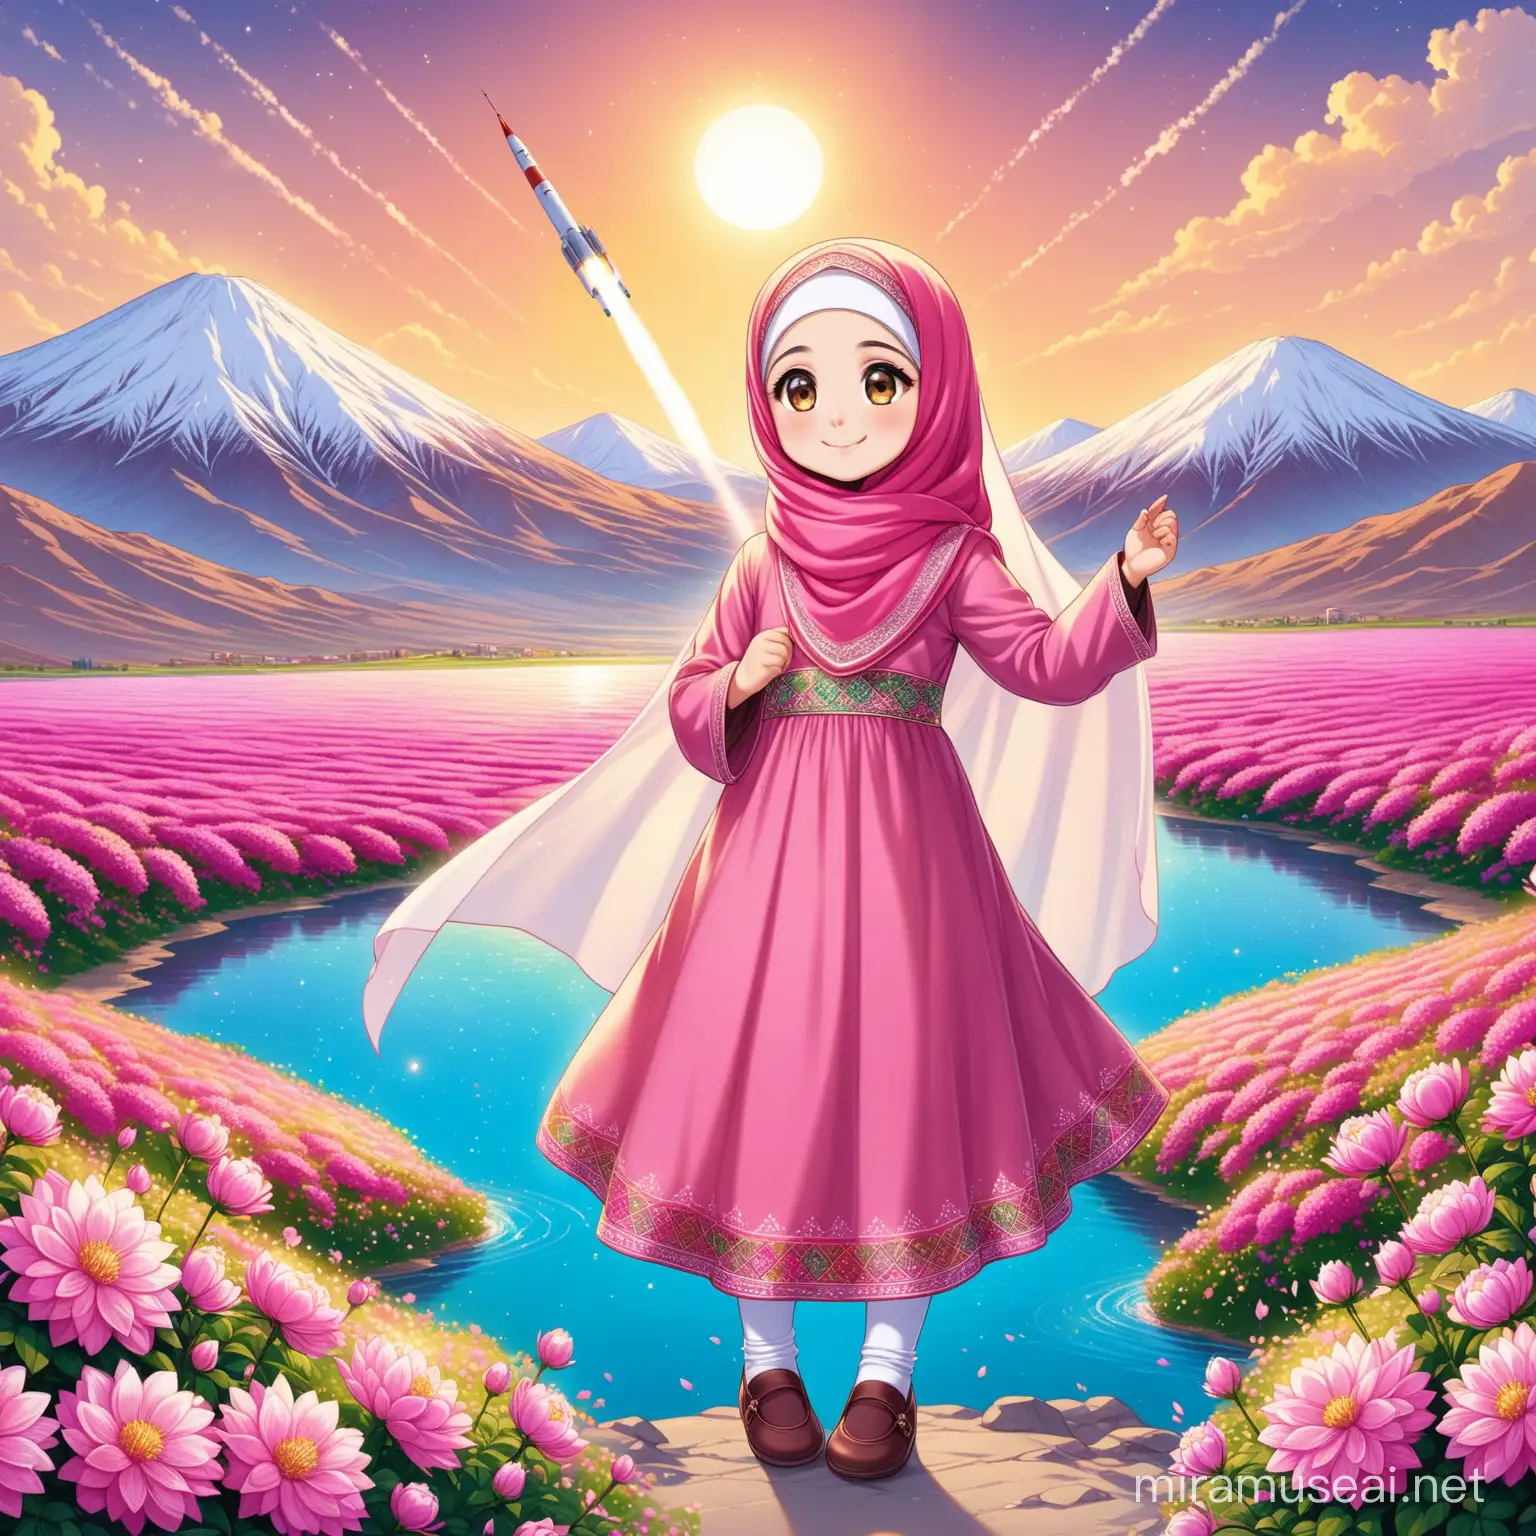 Persian little girl(full height, Muslim, with emphasis no hair out of veil(Hijab), small eyes, bigger nose, white skin, cute, smiling, wearing socks, clothes full of Persian designs).
Atmosphere Damavand mountain, nice flag of Iran proudly raised, firing satellite to sky and full of many pink flowers, lake, sparing.